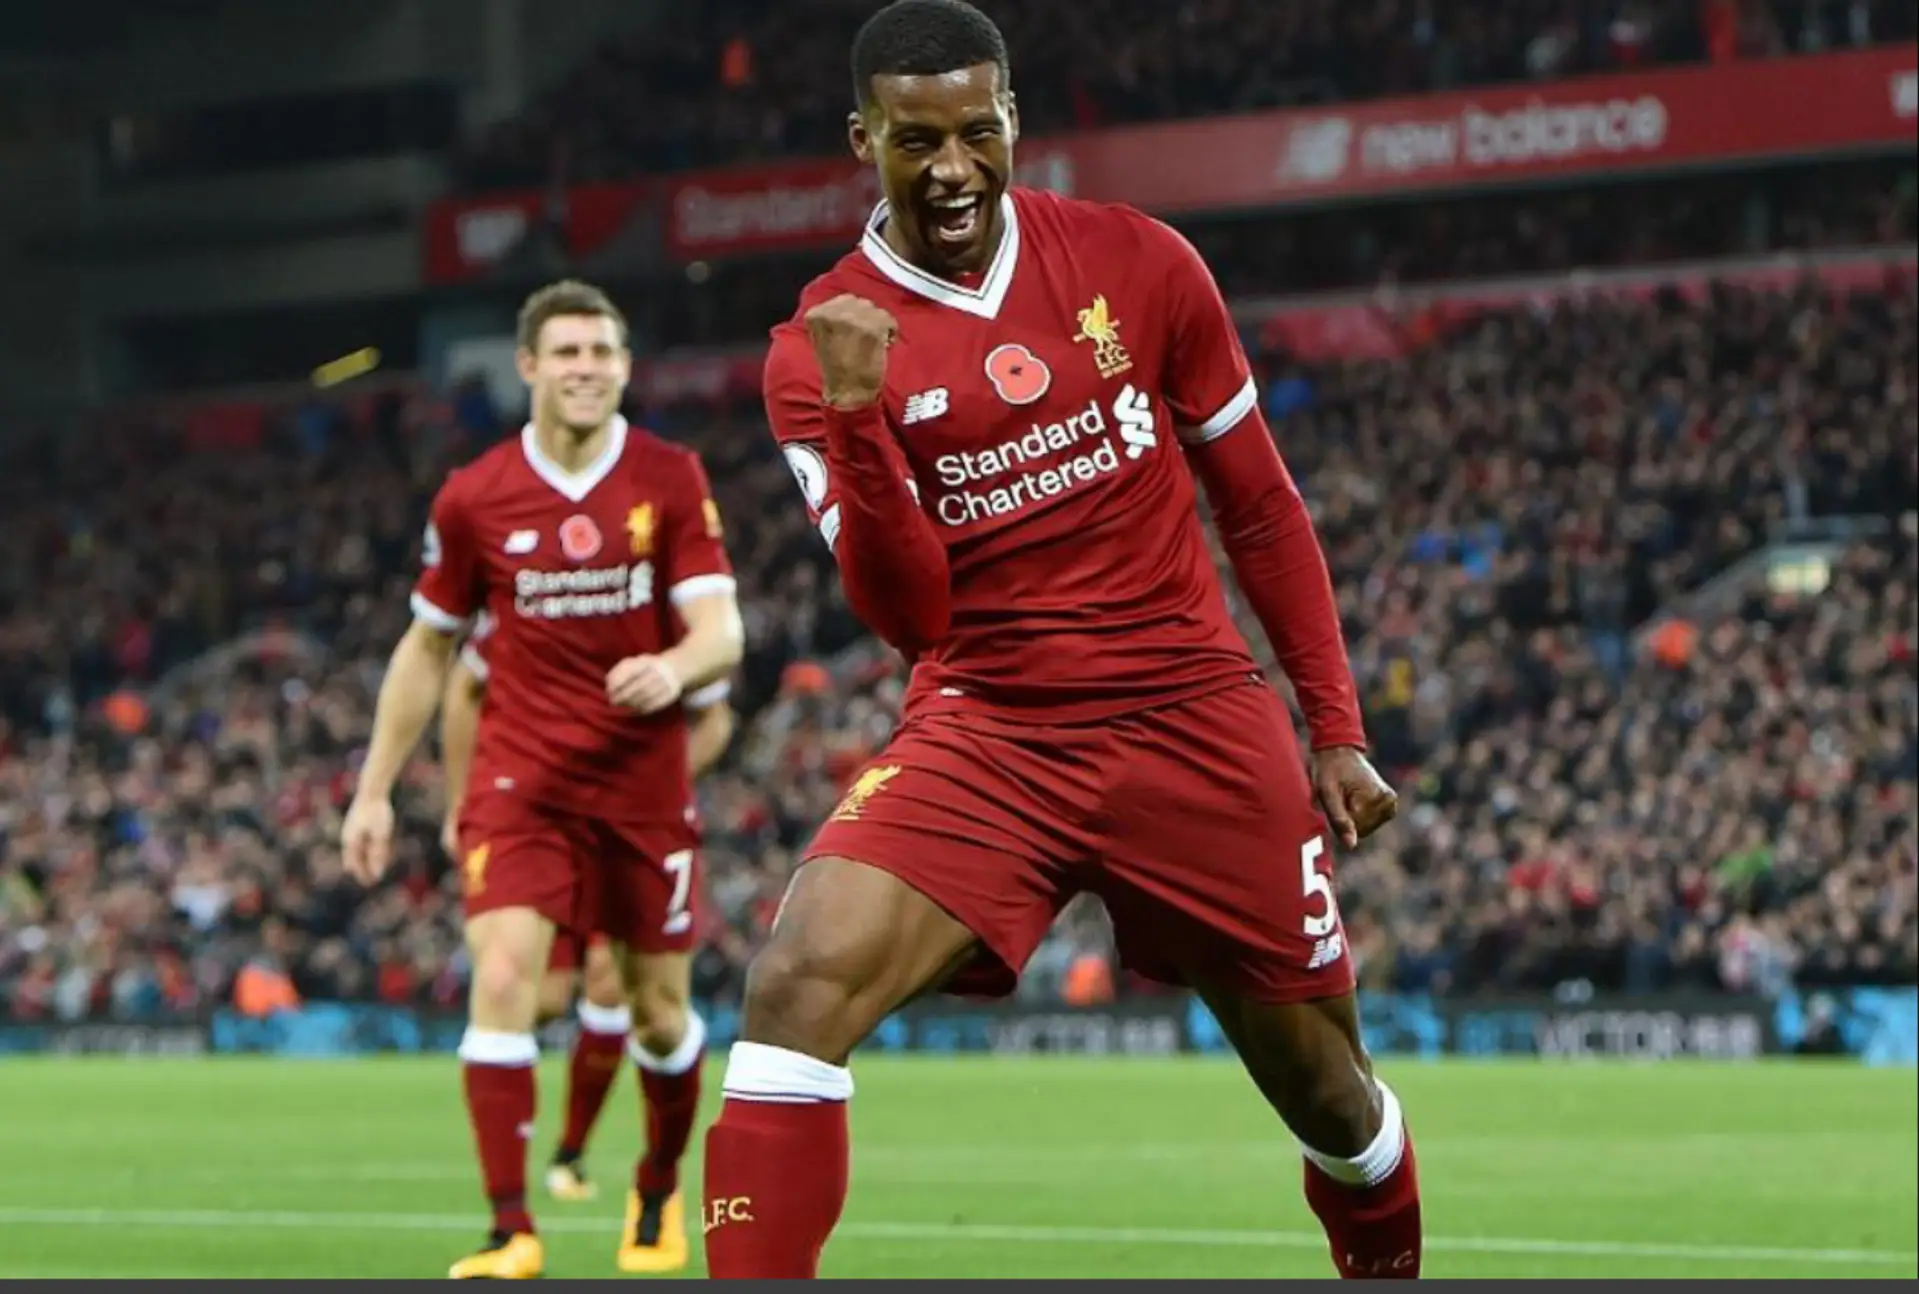 Why we should get Gini Wijnaldum from Liverpool